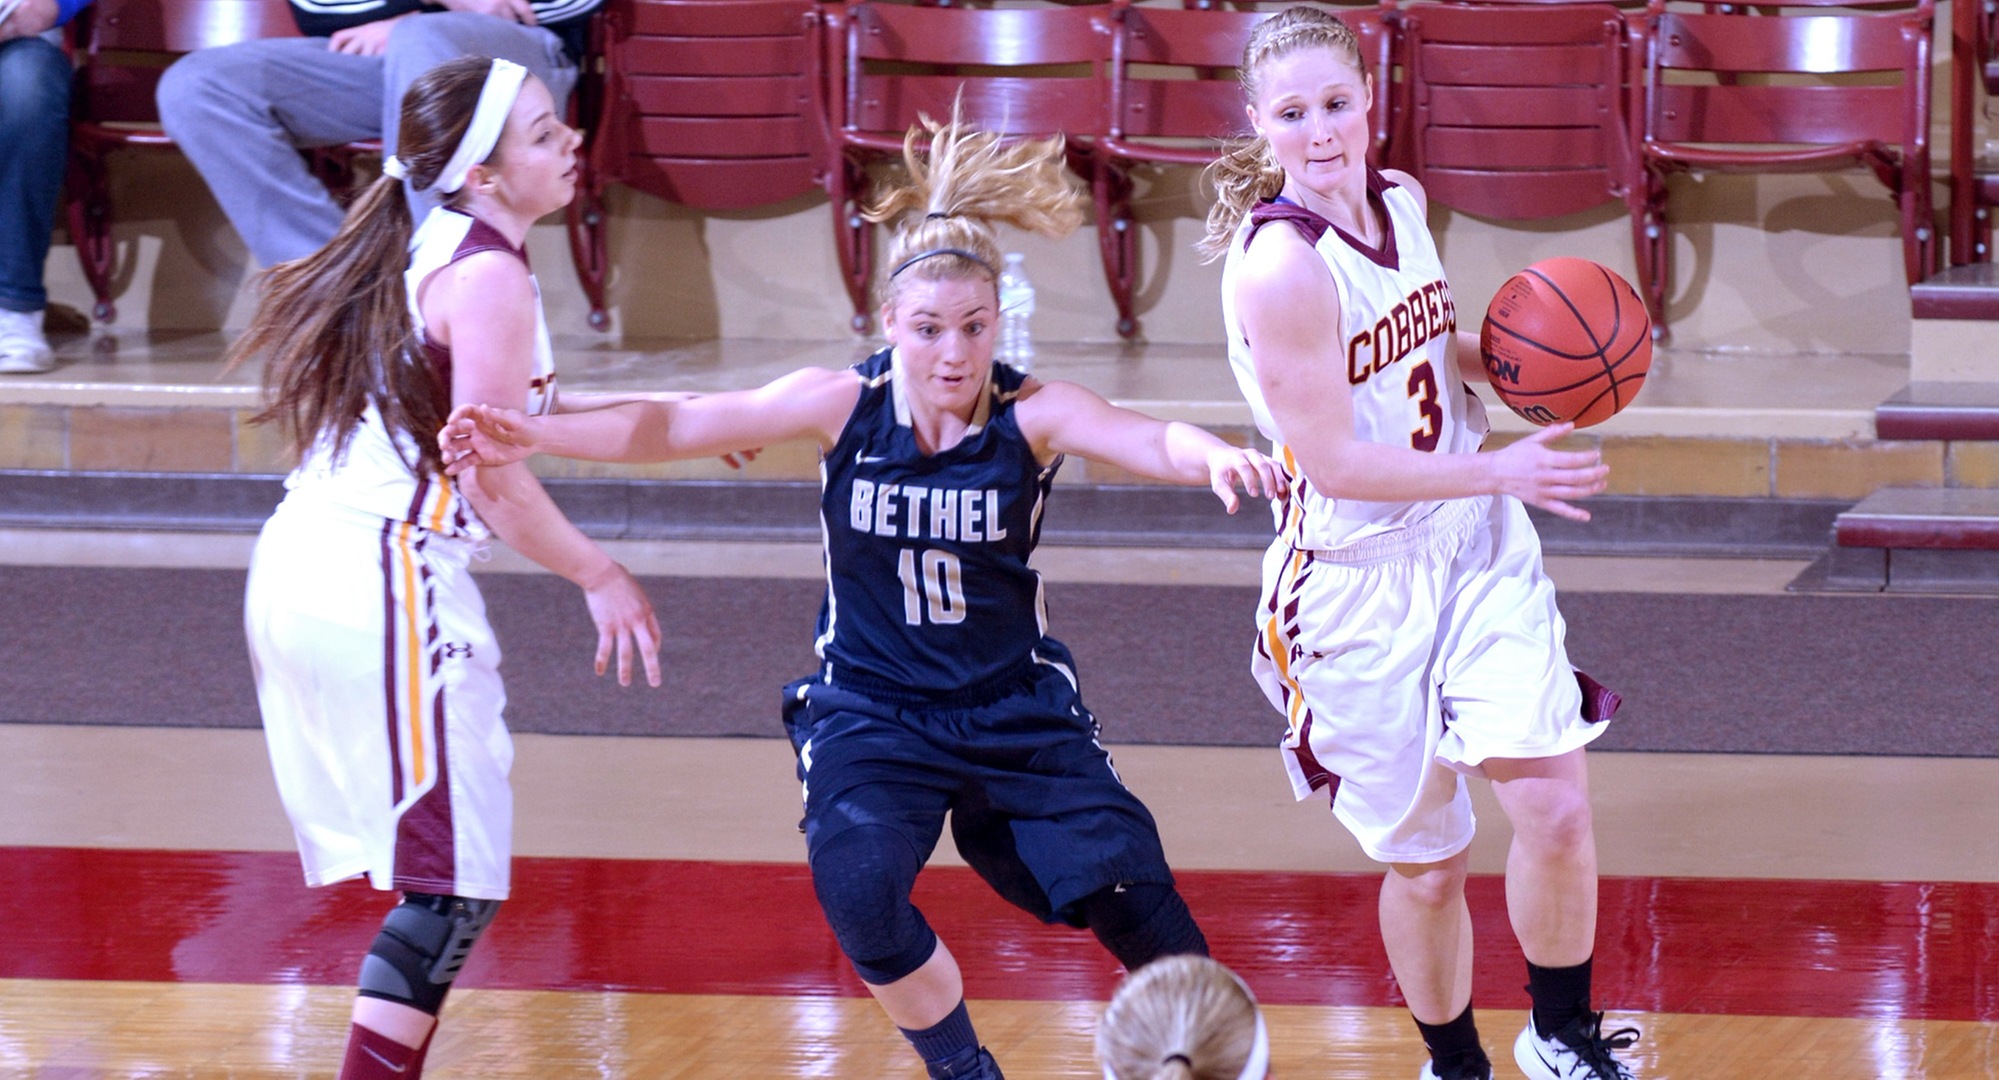 Senior Greta Walsh (#3) scored a team-high 16 points at Bethel while junior Cassidy Rahman (L) was perfect from the floor and finished with seven points.